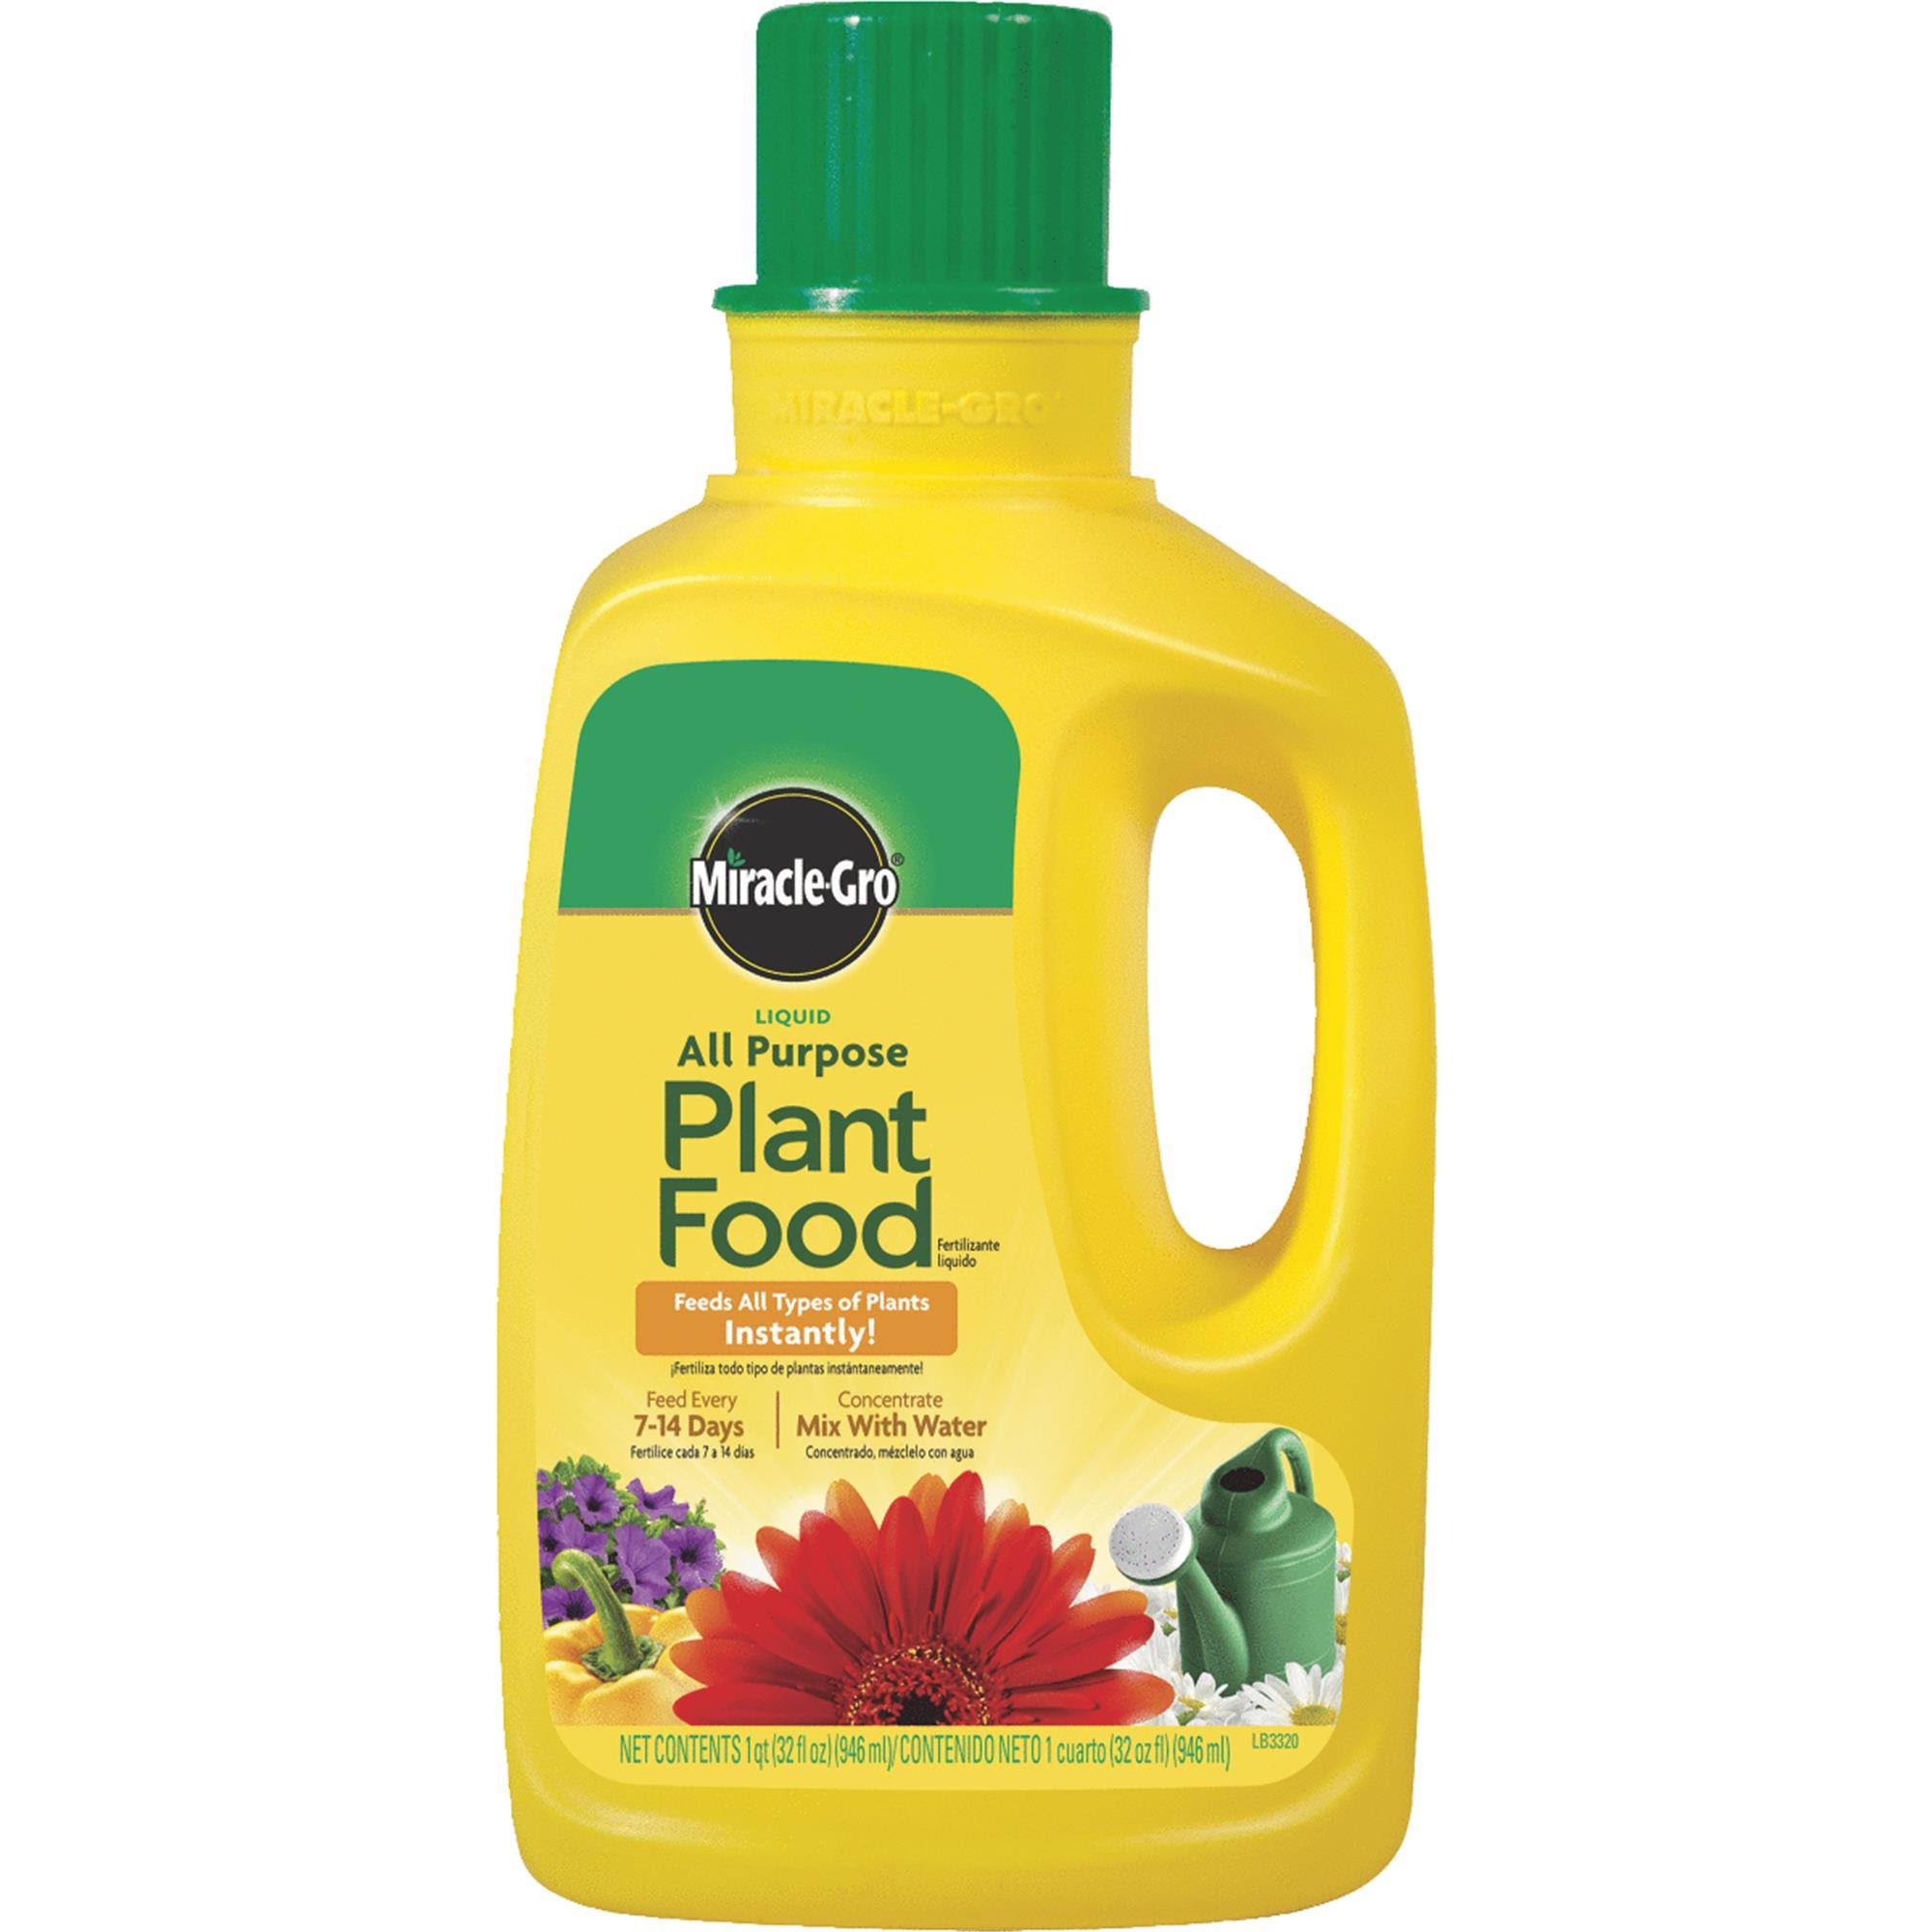 Miracle-Gro Liquid All Purpose Plant Food Concentrate - 946ml